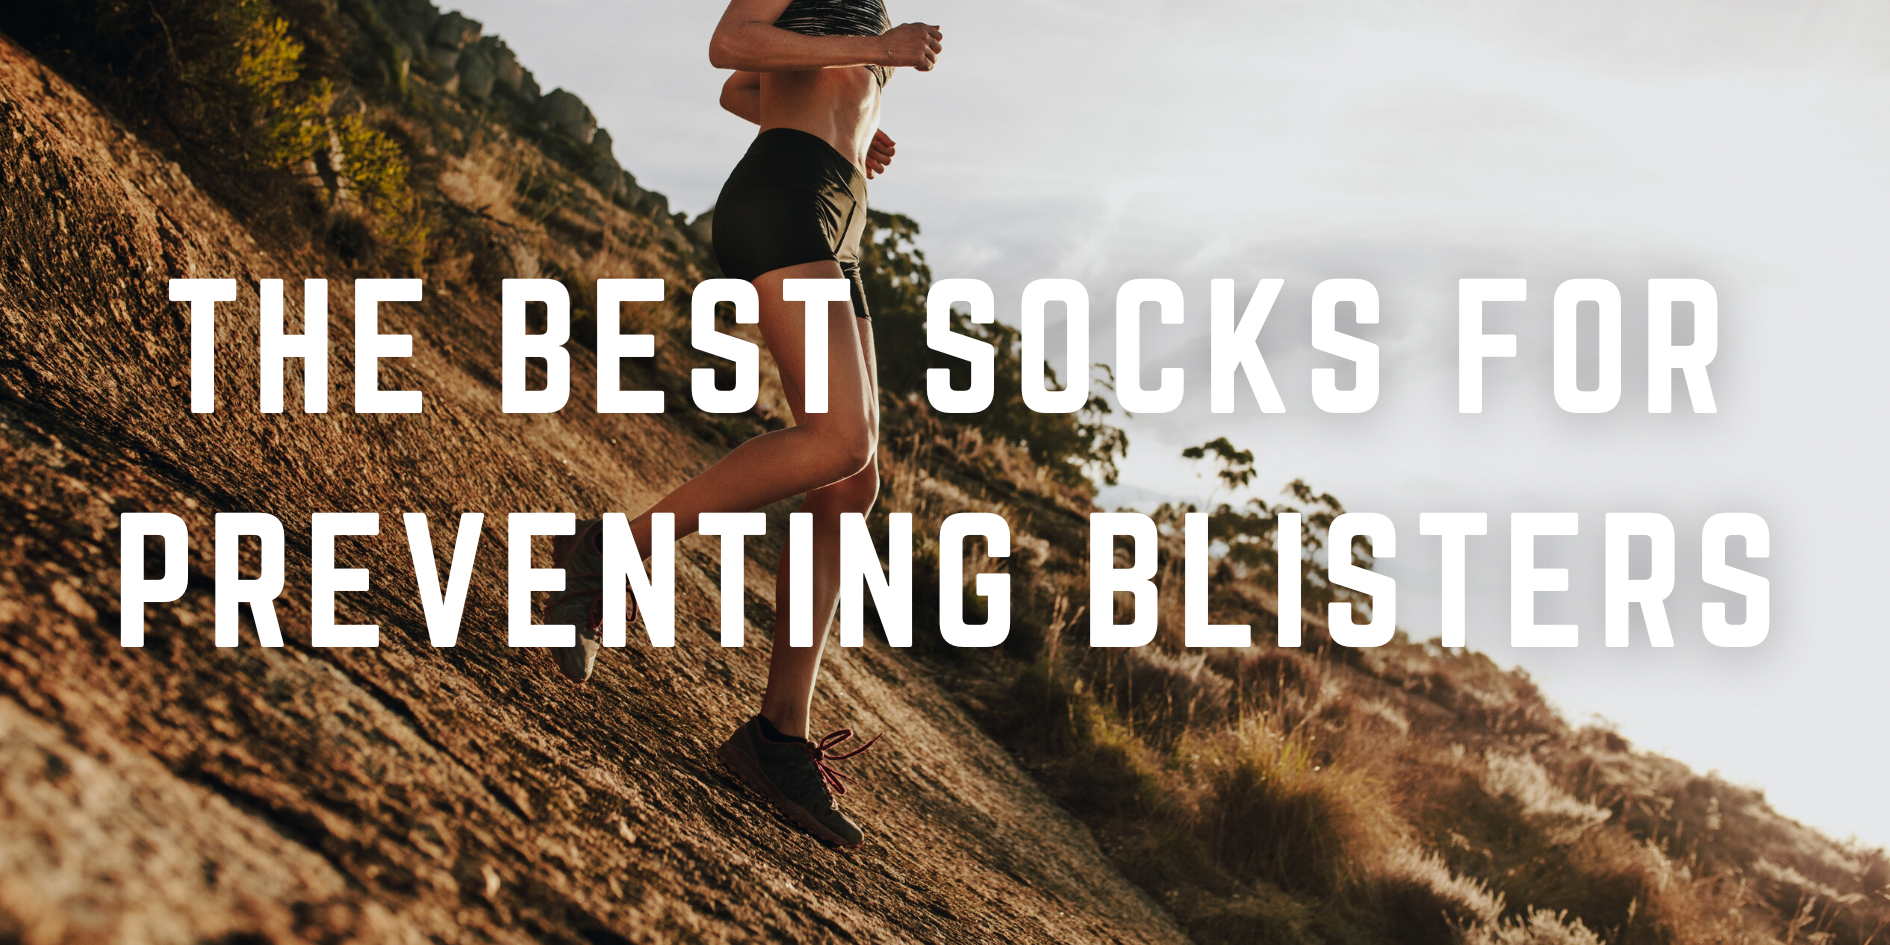 The Best Socks For Preventing Blisters without lubes, band-aids or new shoes…